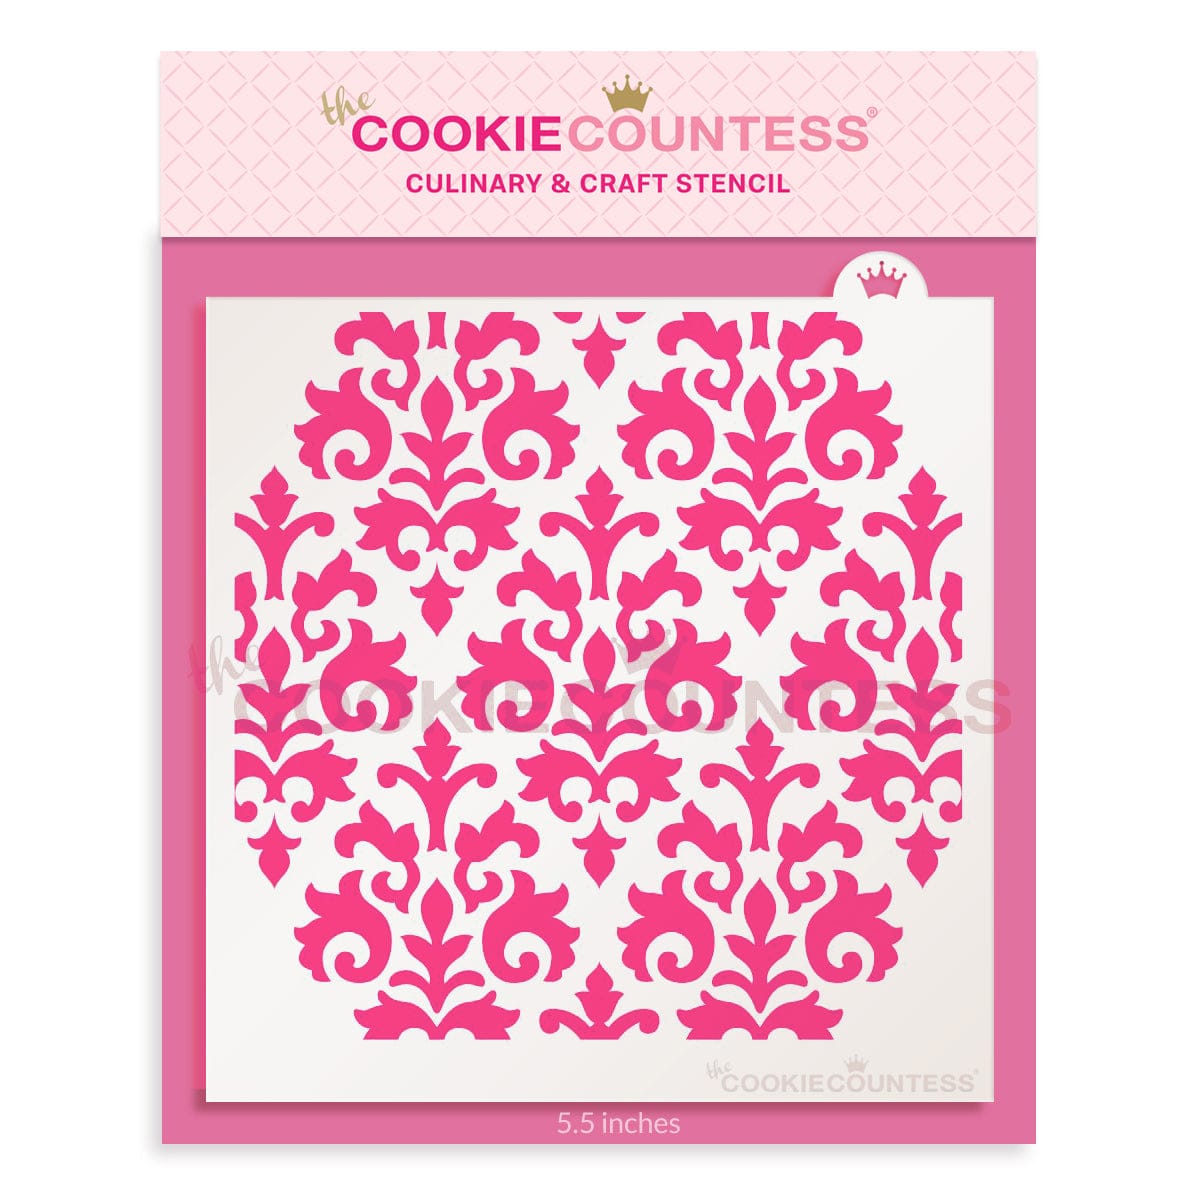 Using Cookie Stenciling to Easily Create Unique Designs - Your Baking Bestie